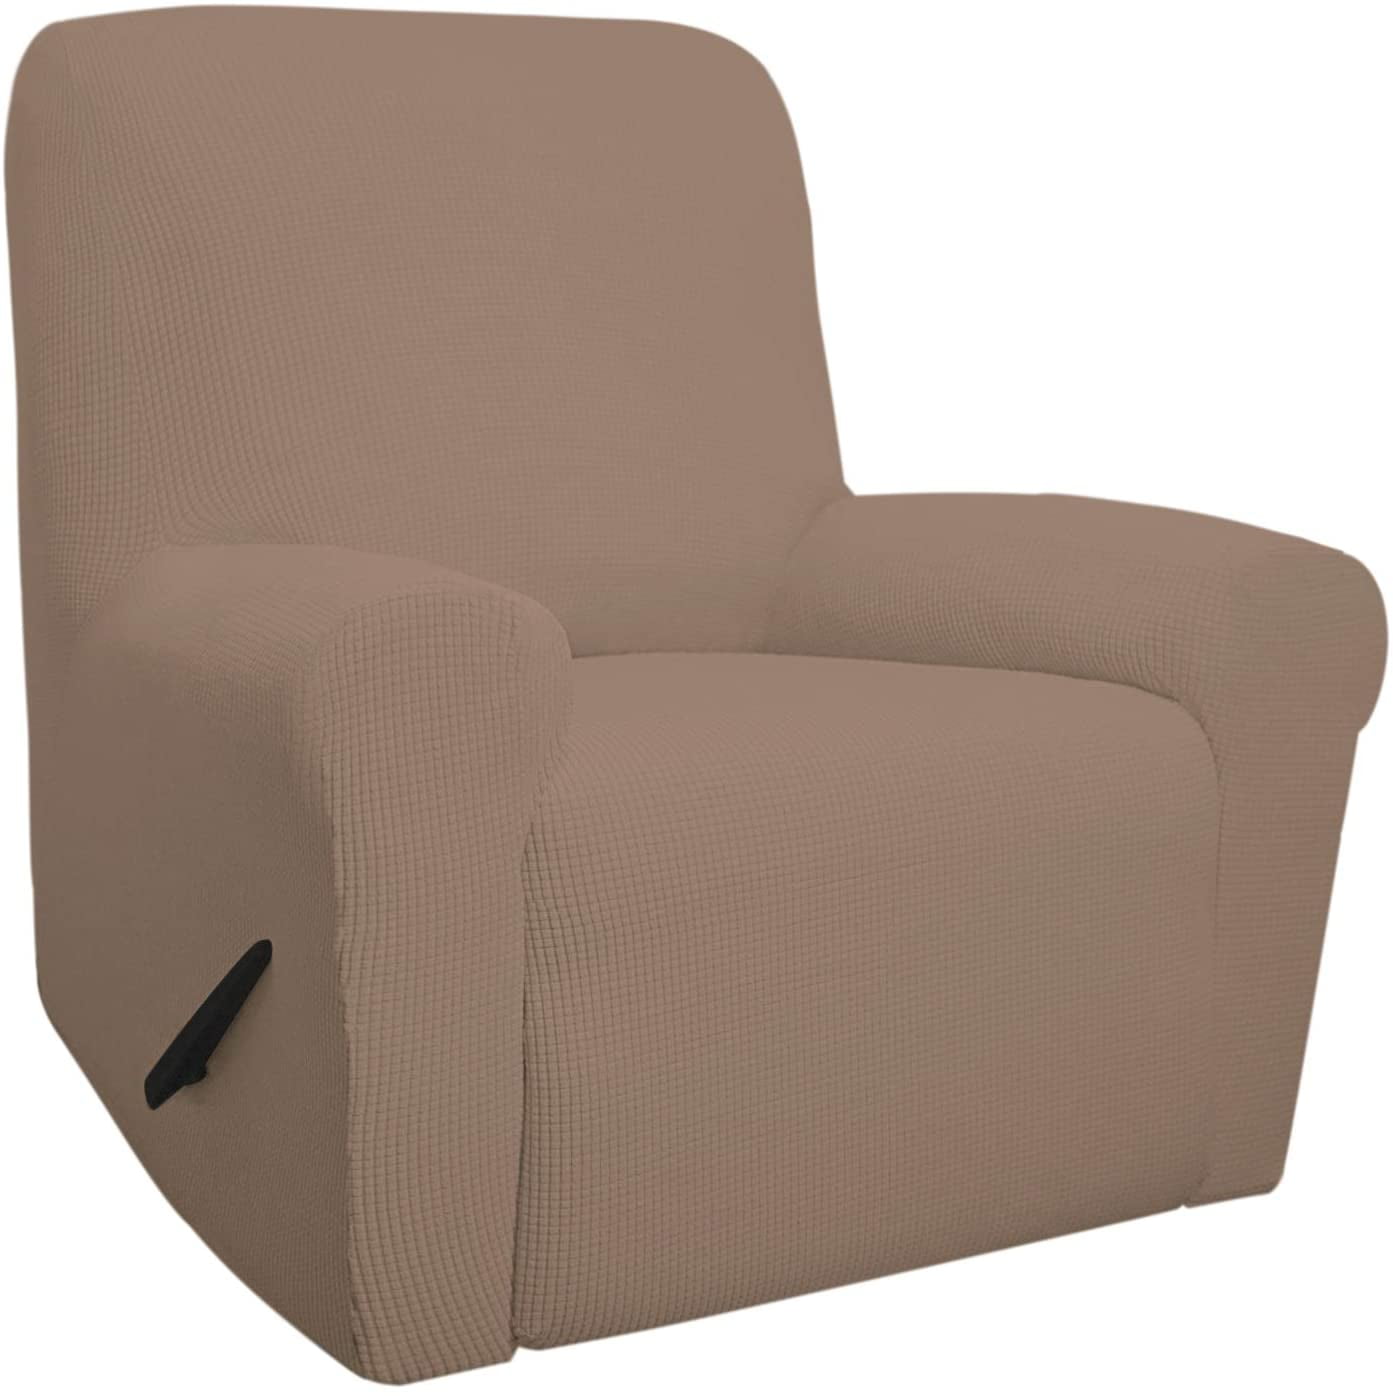 Stretch Recliner Camel Easy-Going Recliner slipcovers 